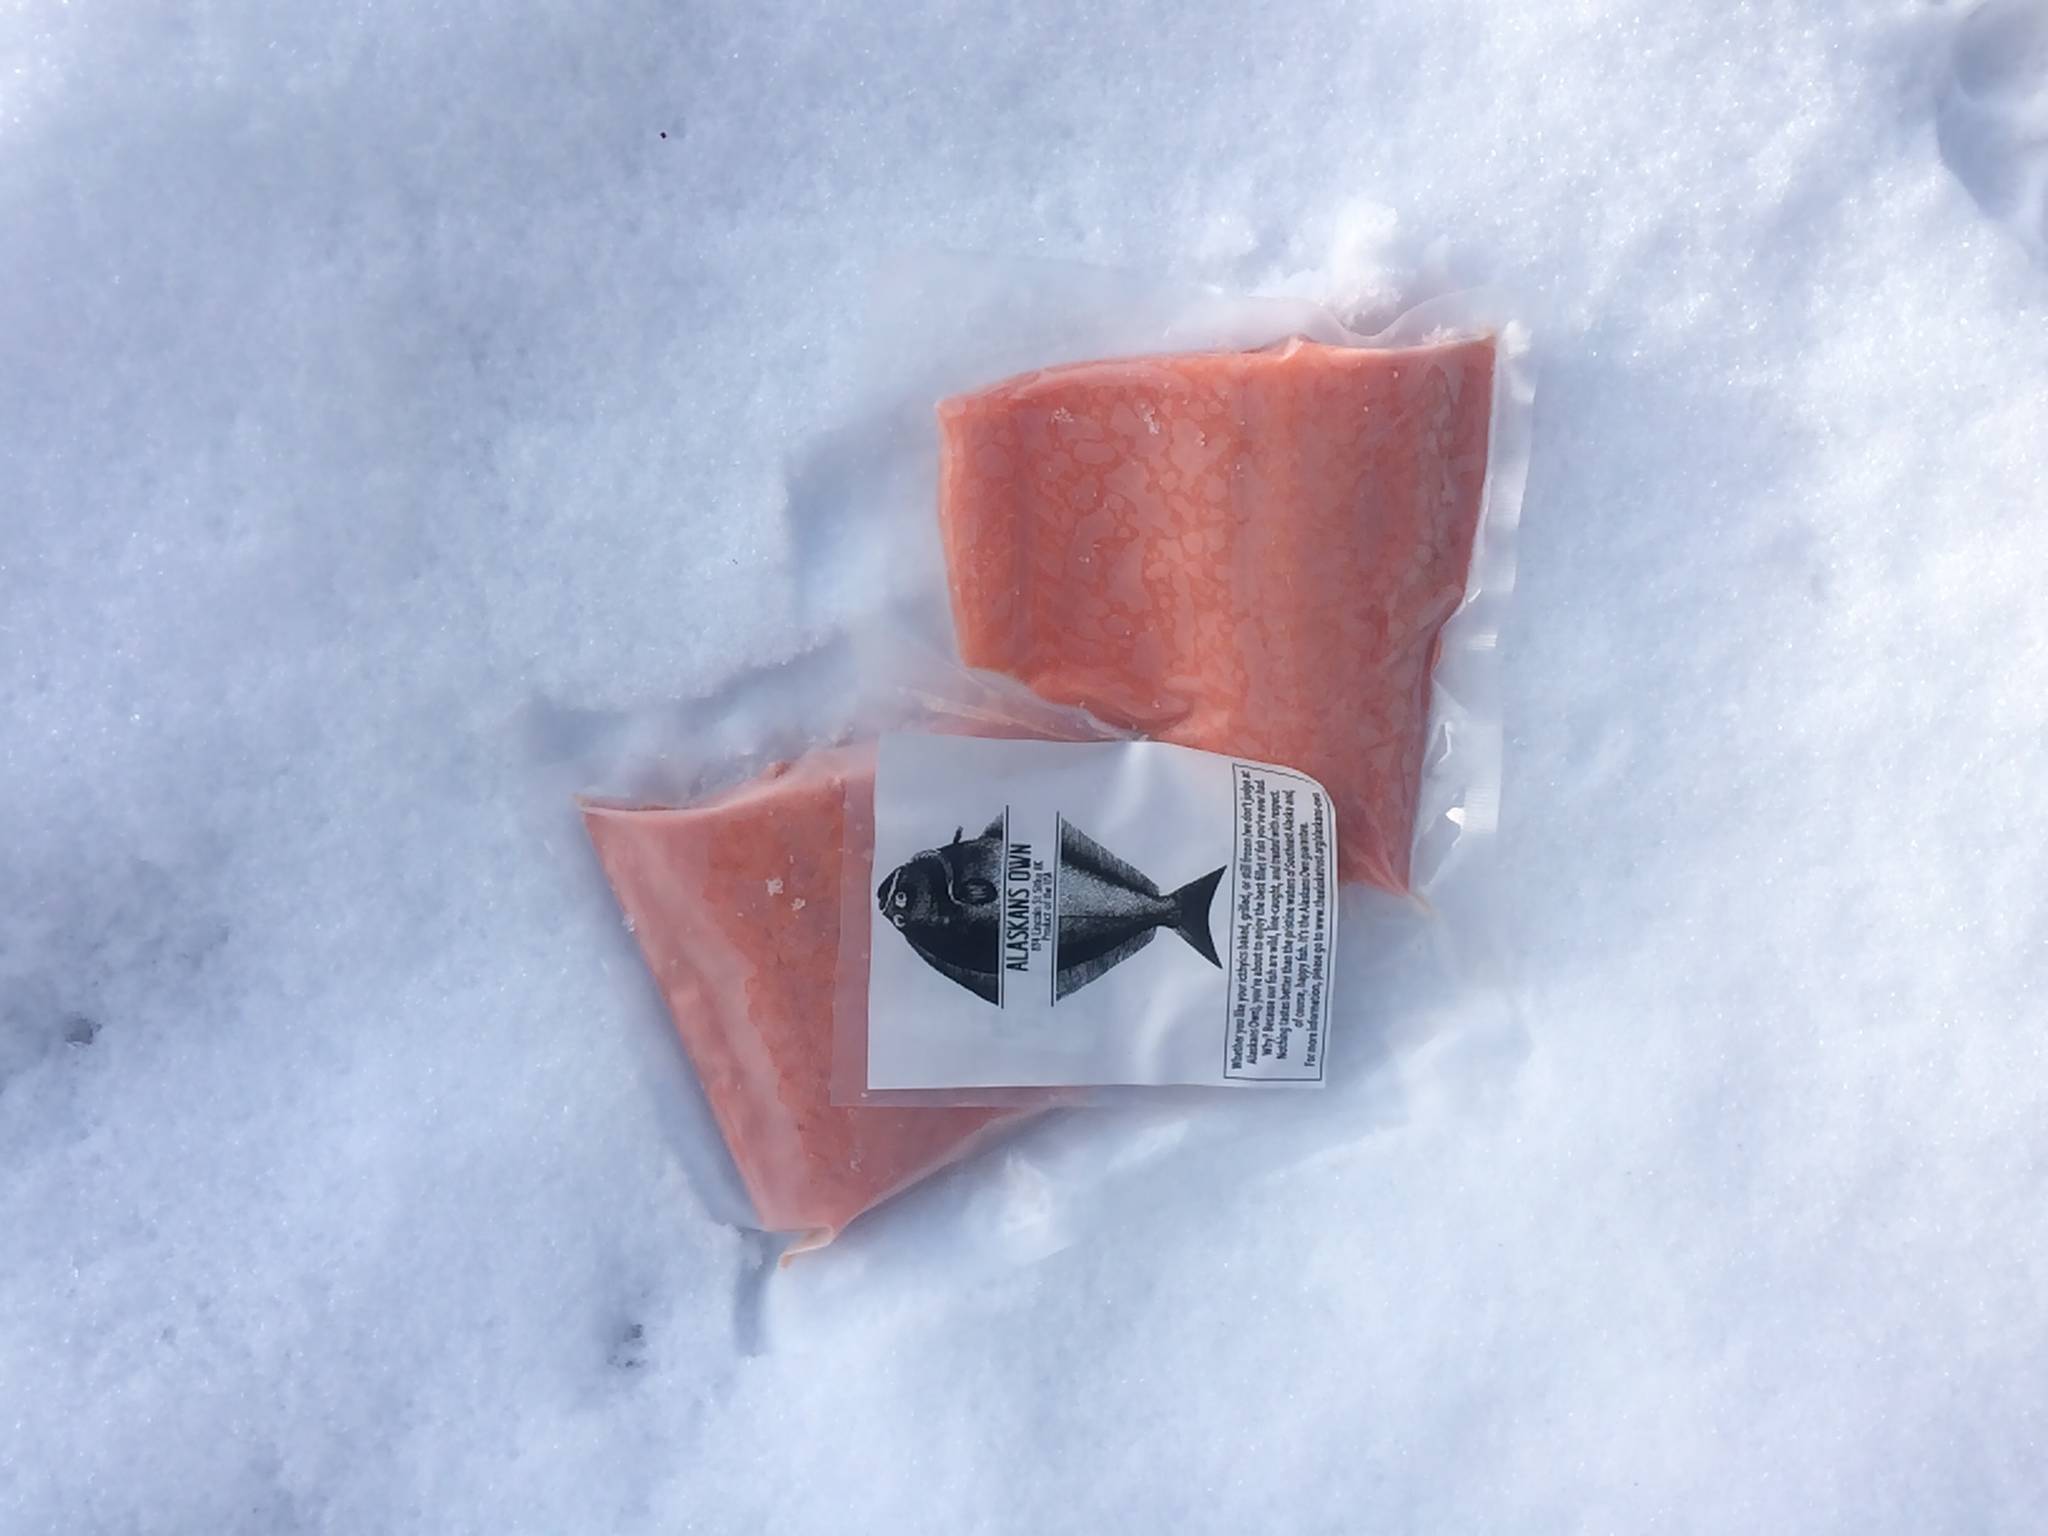 Alaskan’s Own seafood are flash-frozen and vacuum packed to taste as fresh as the day they were caught. Photo by Alyssa Russell Alaskan’s Own seafood are flash-frozen and vacuum packed to taste as fresh as the day they were caught. Photo by Alyssa Russell.